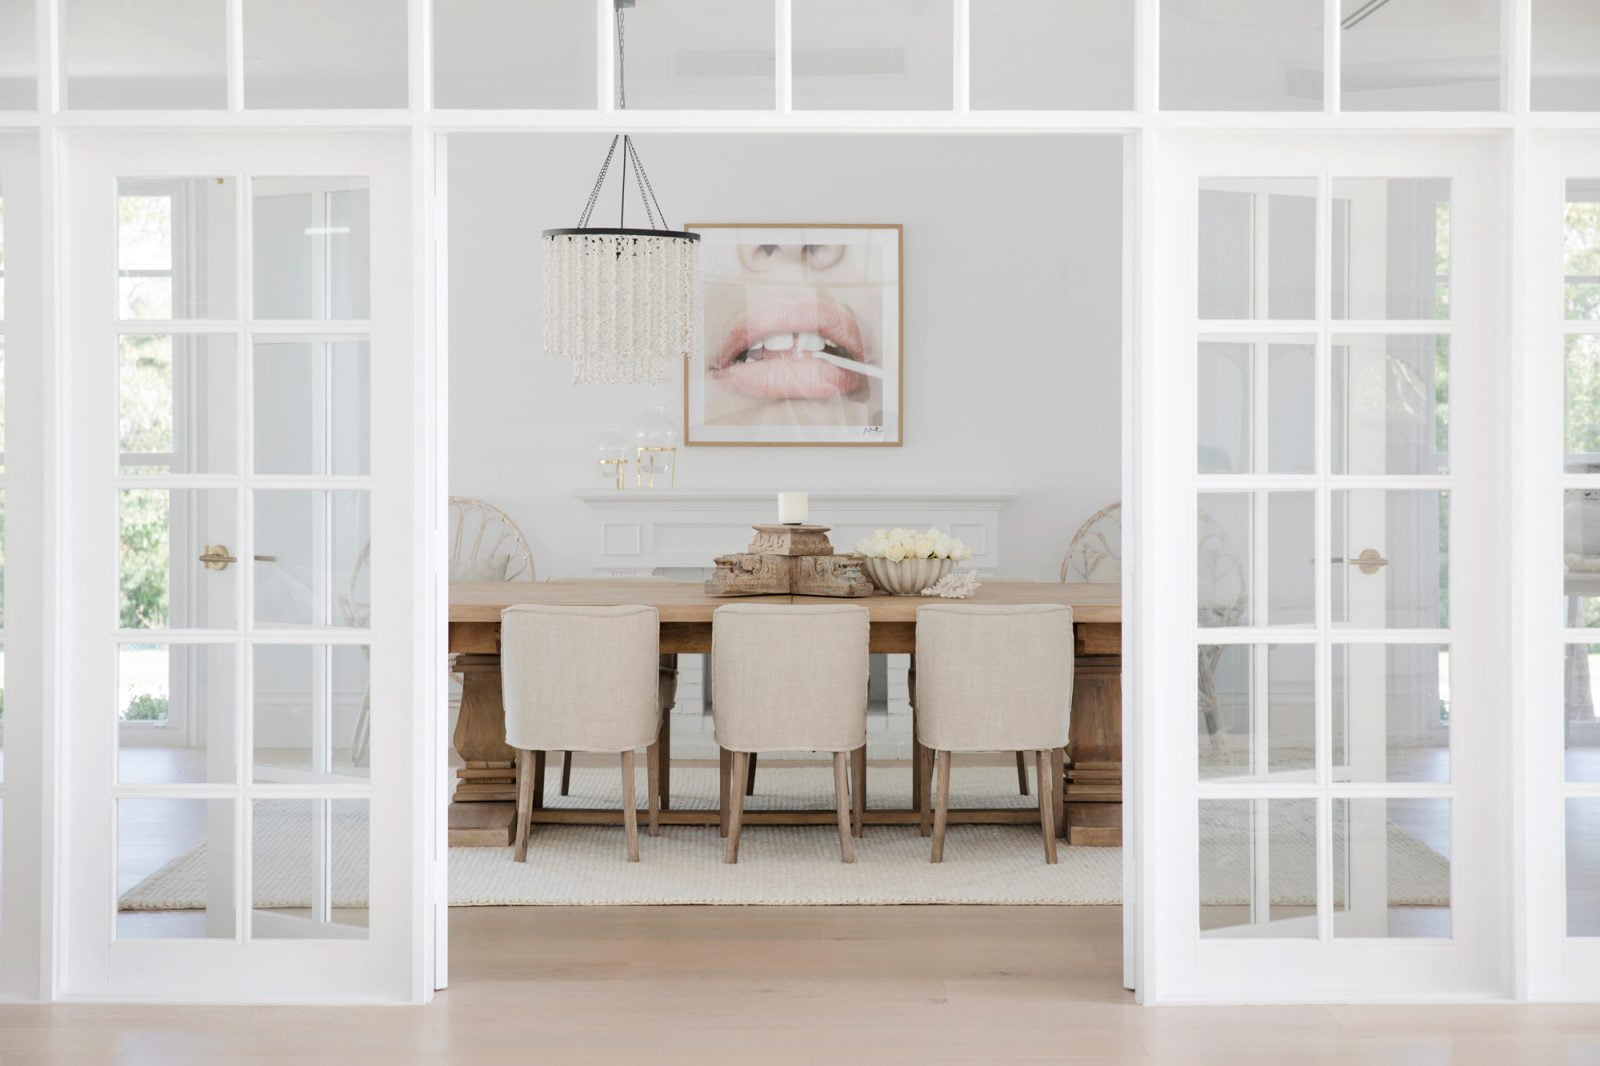 Three Birds Renovations: Natura timber french doors with colonial bars and highlight windows painted white, House 8